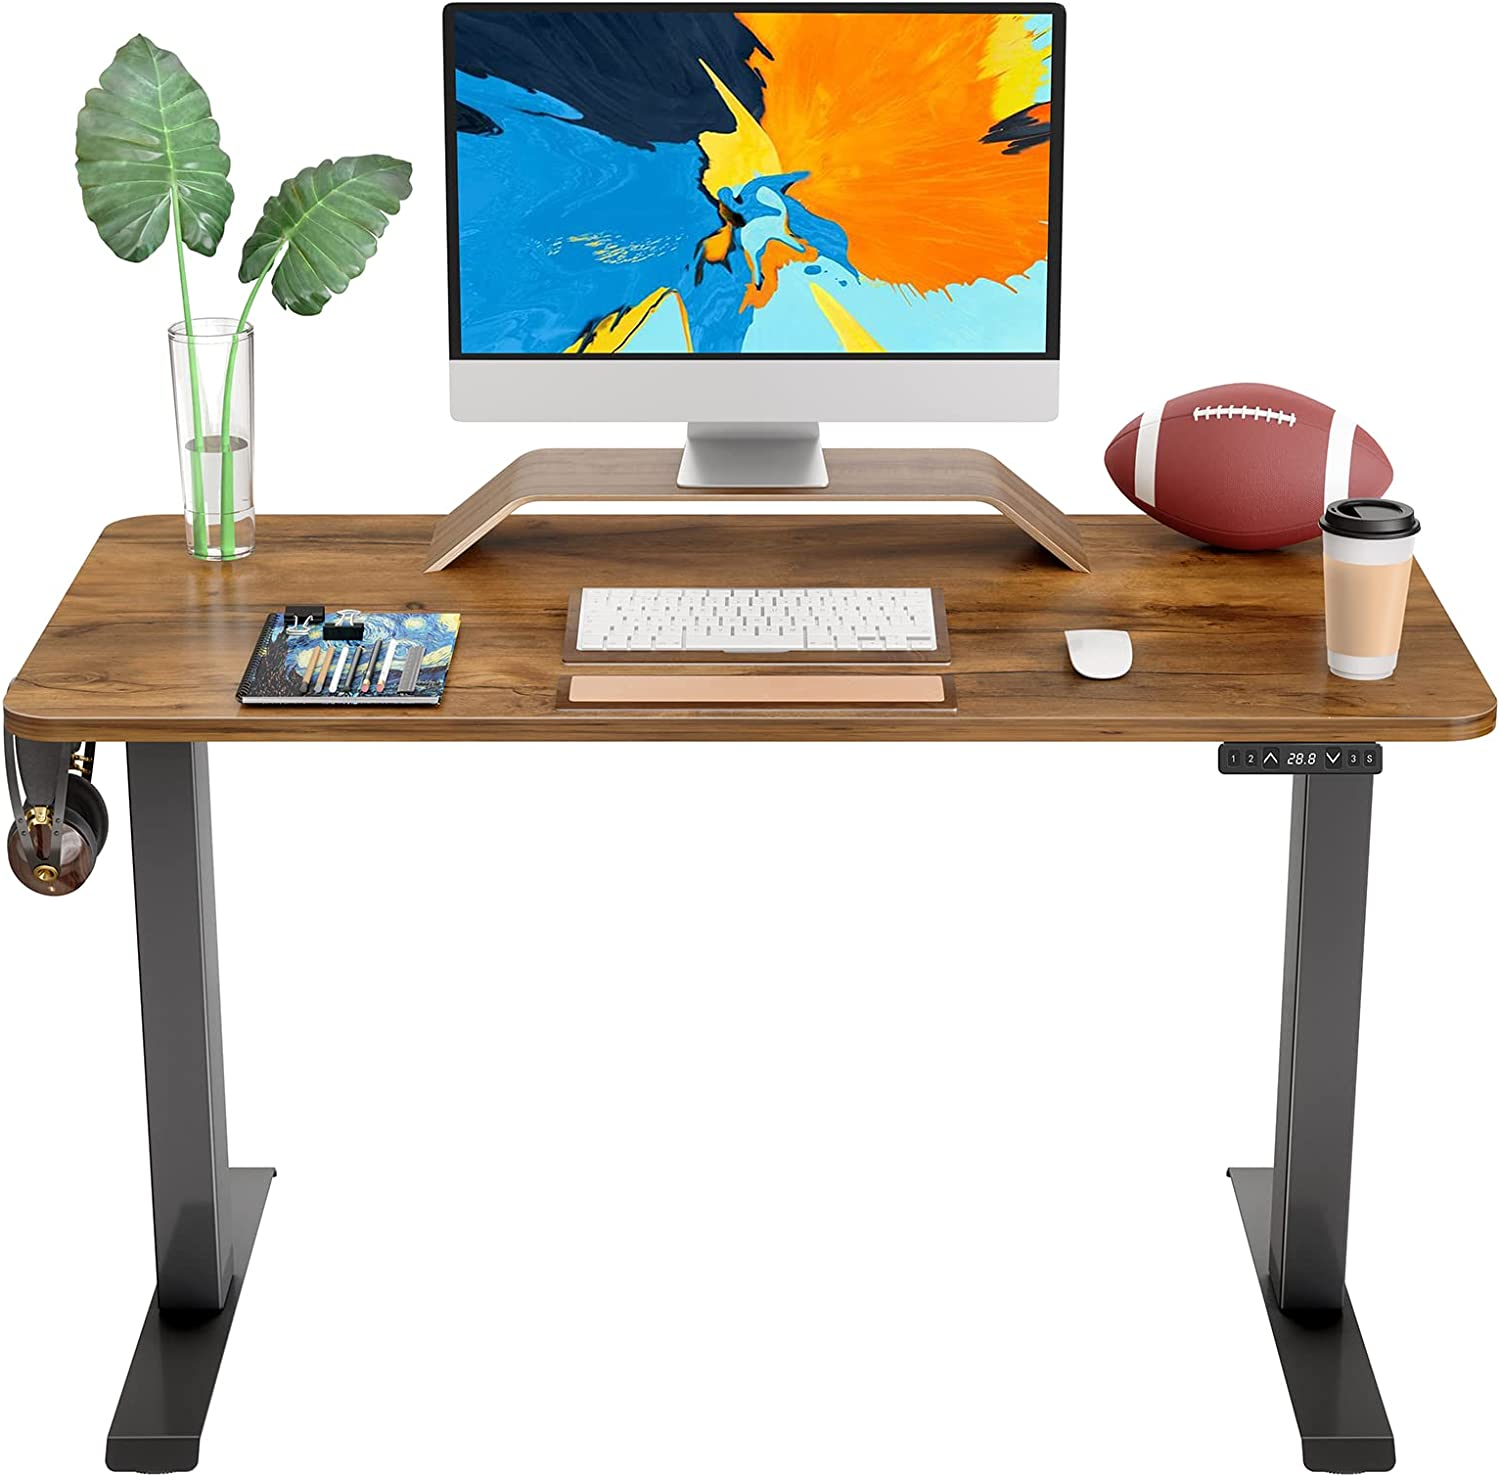 Amazon.com: FAMISKY Standing Desk Dual Motors, Adjustable Height Electric Stand up Desk, 40 x 24 Inches Sit Stand Home Office Desk, Ergonomic Workstation $170.99